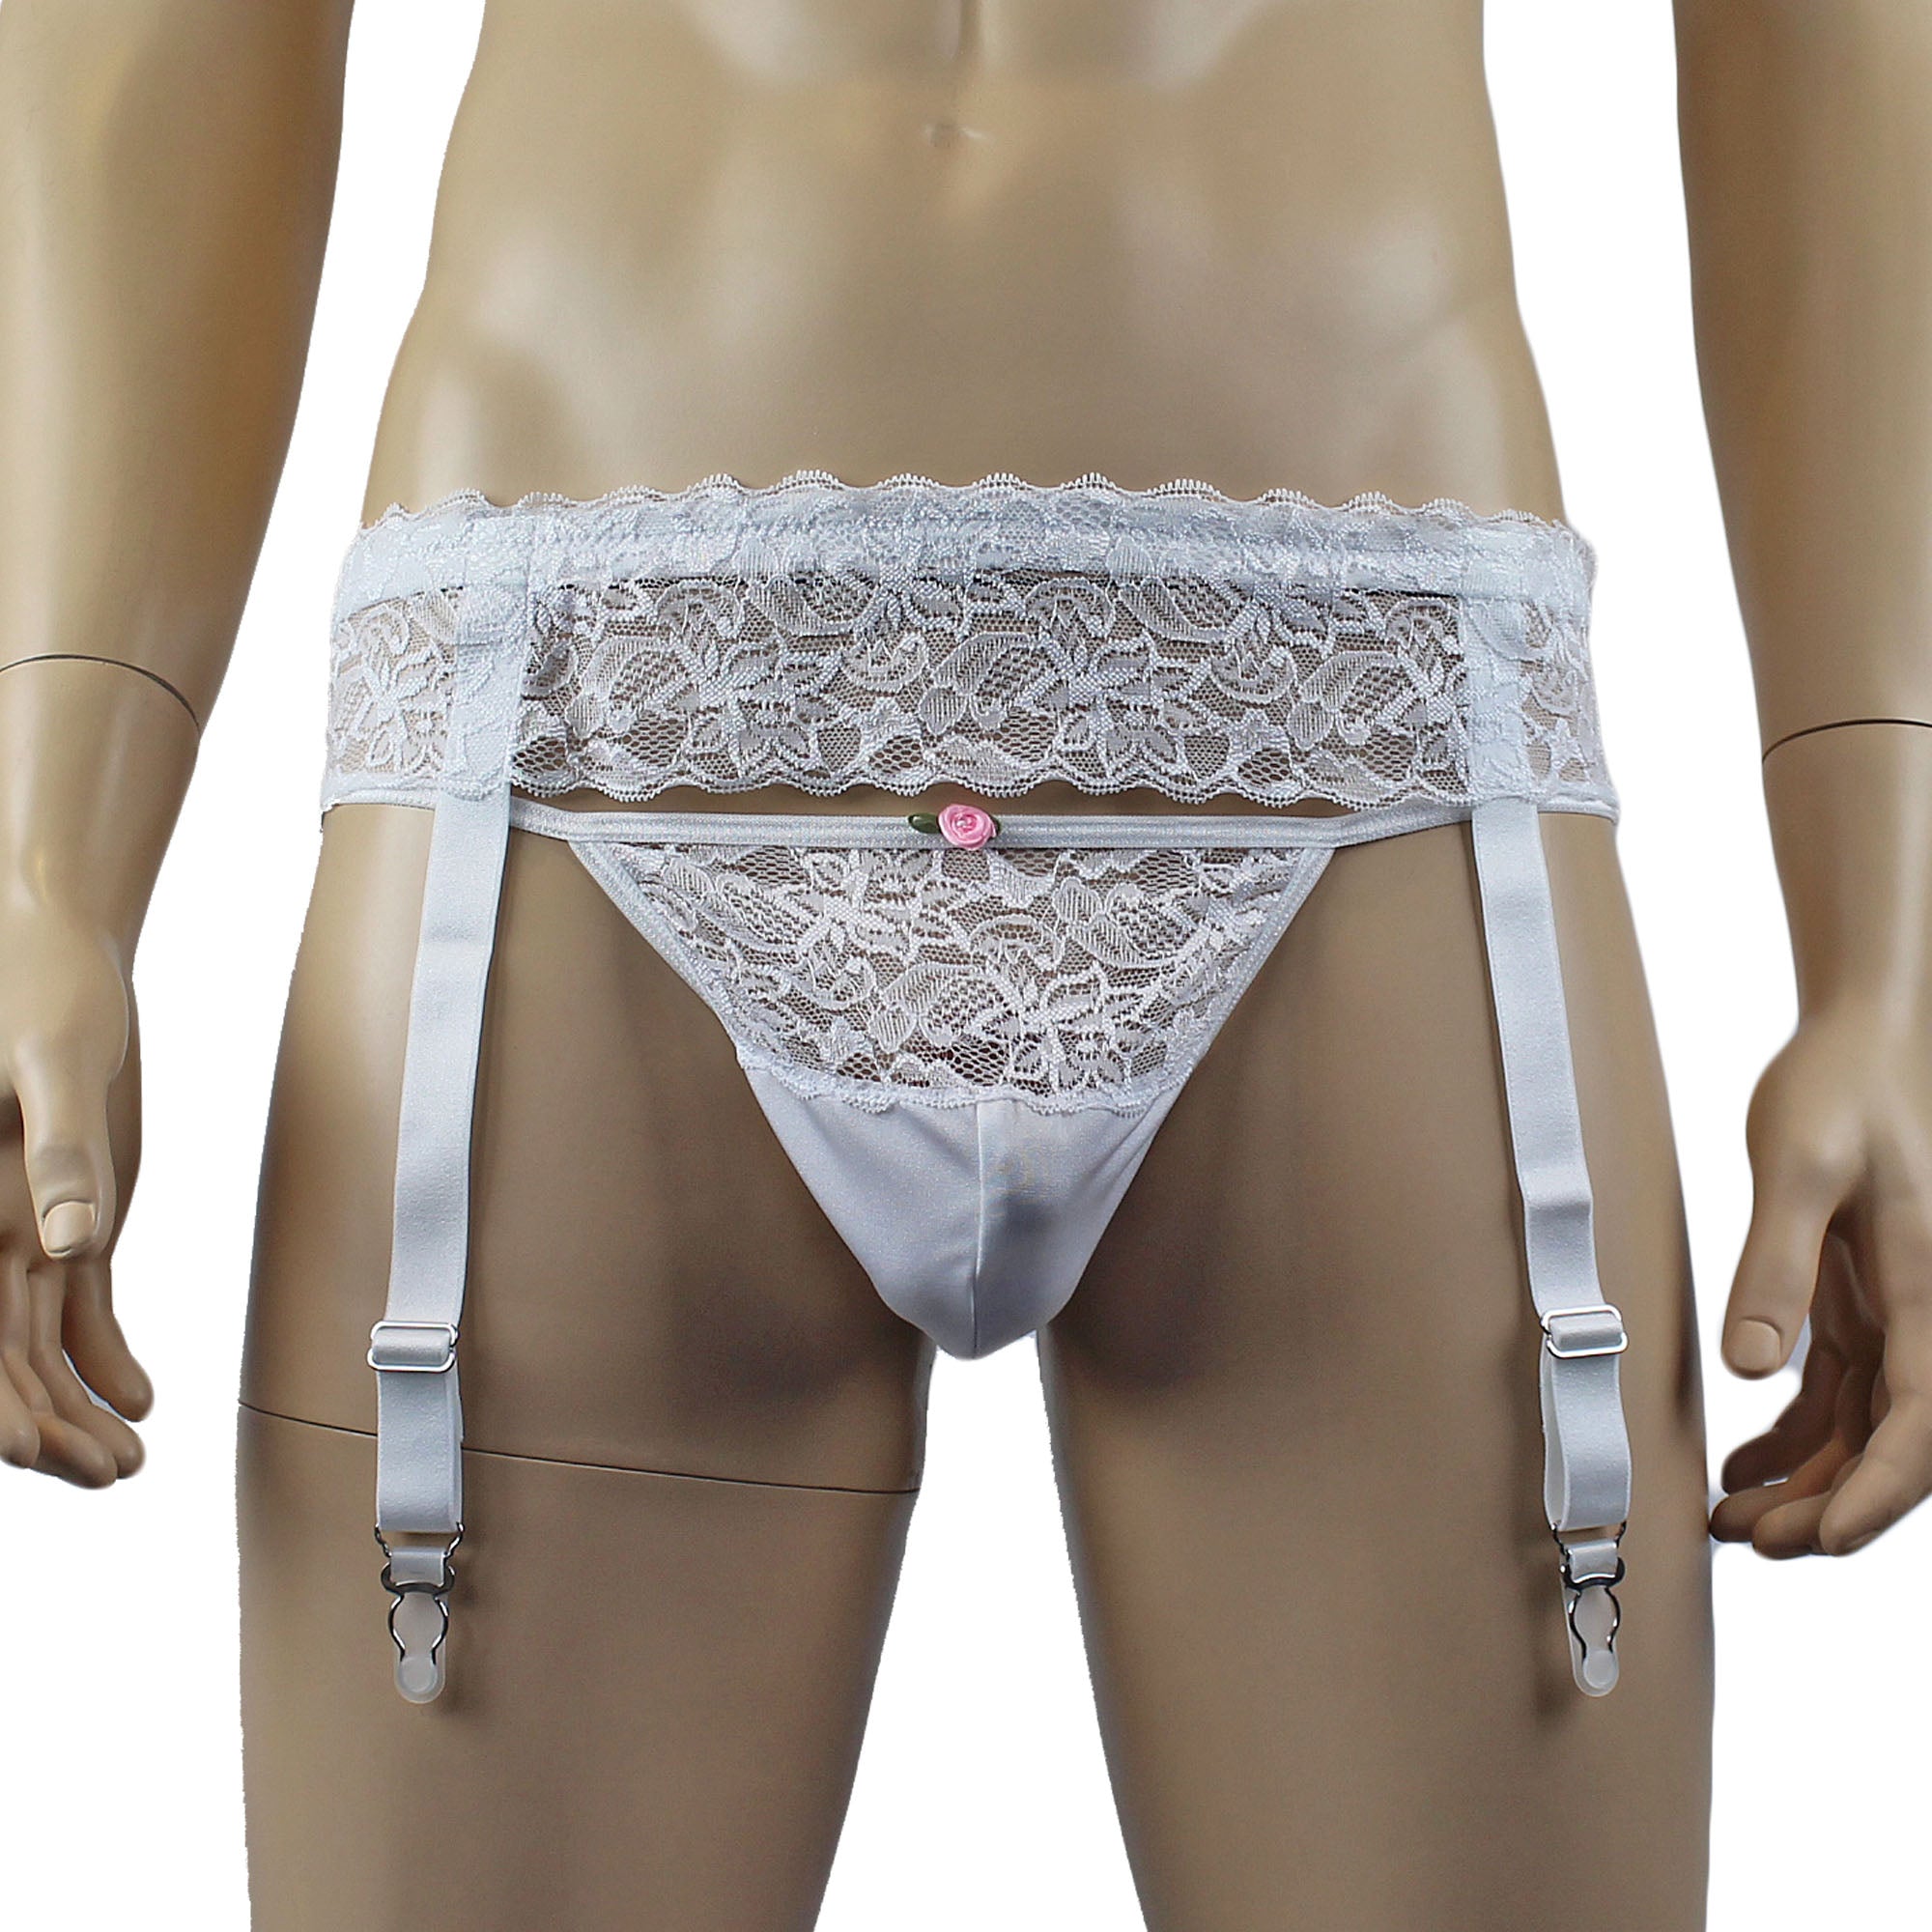 Male Penny Lingerie Bra Top with V Lace front, G string & Garterbelt White